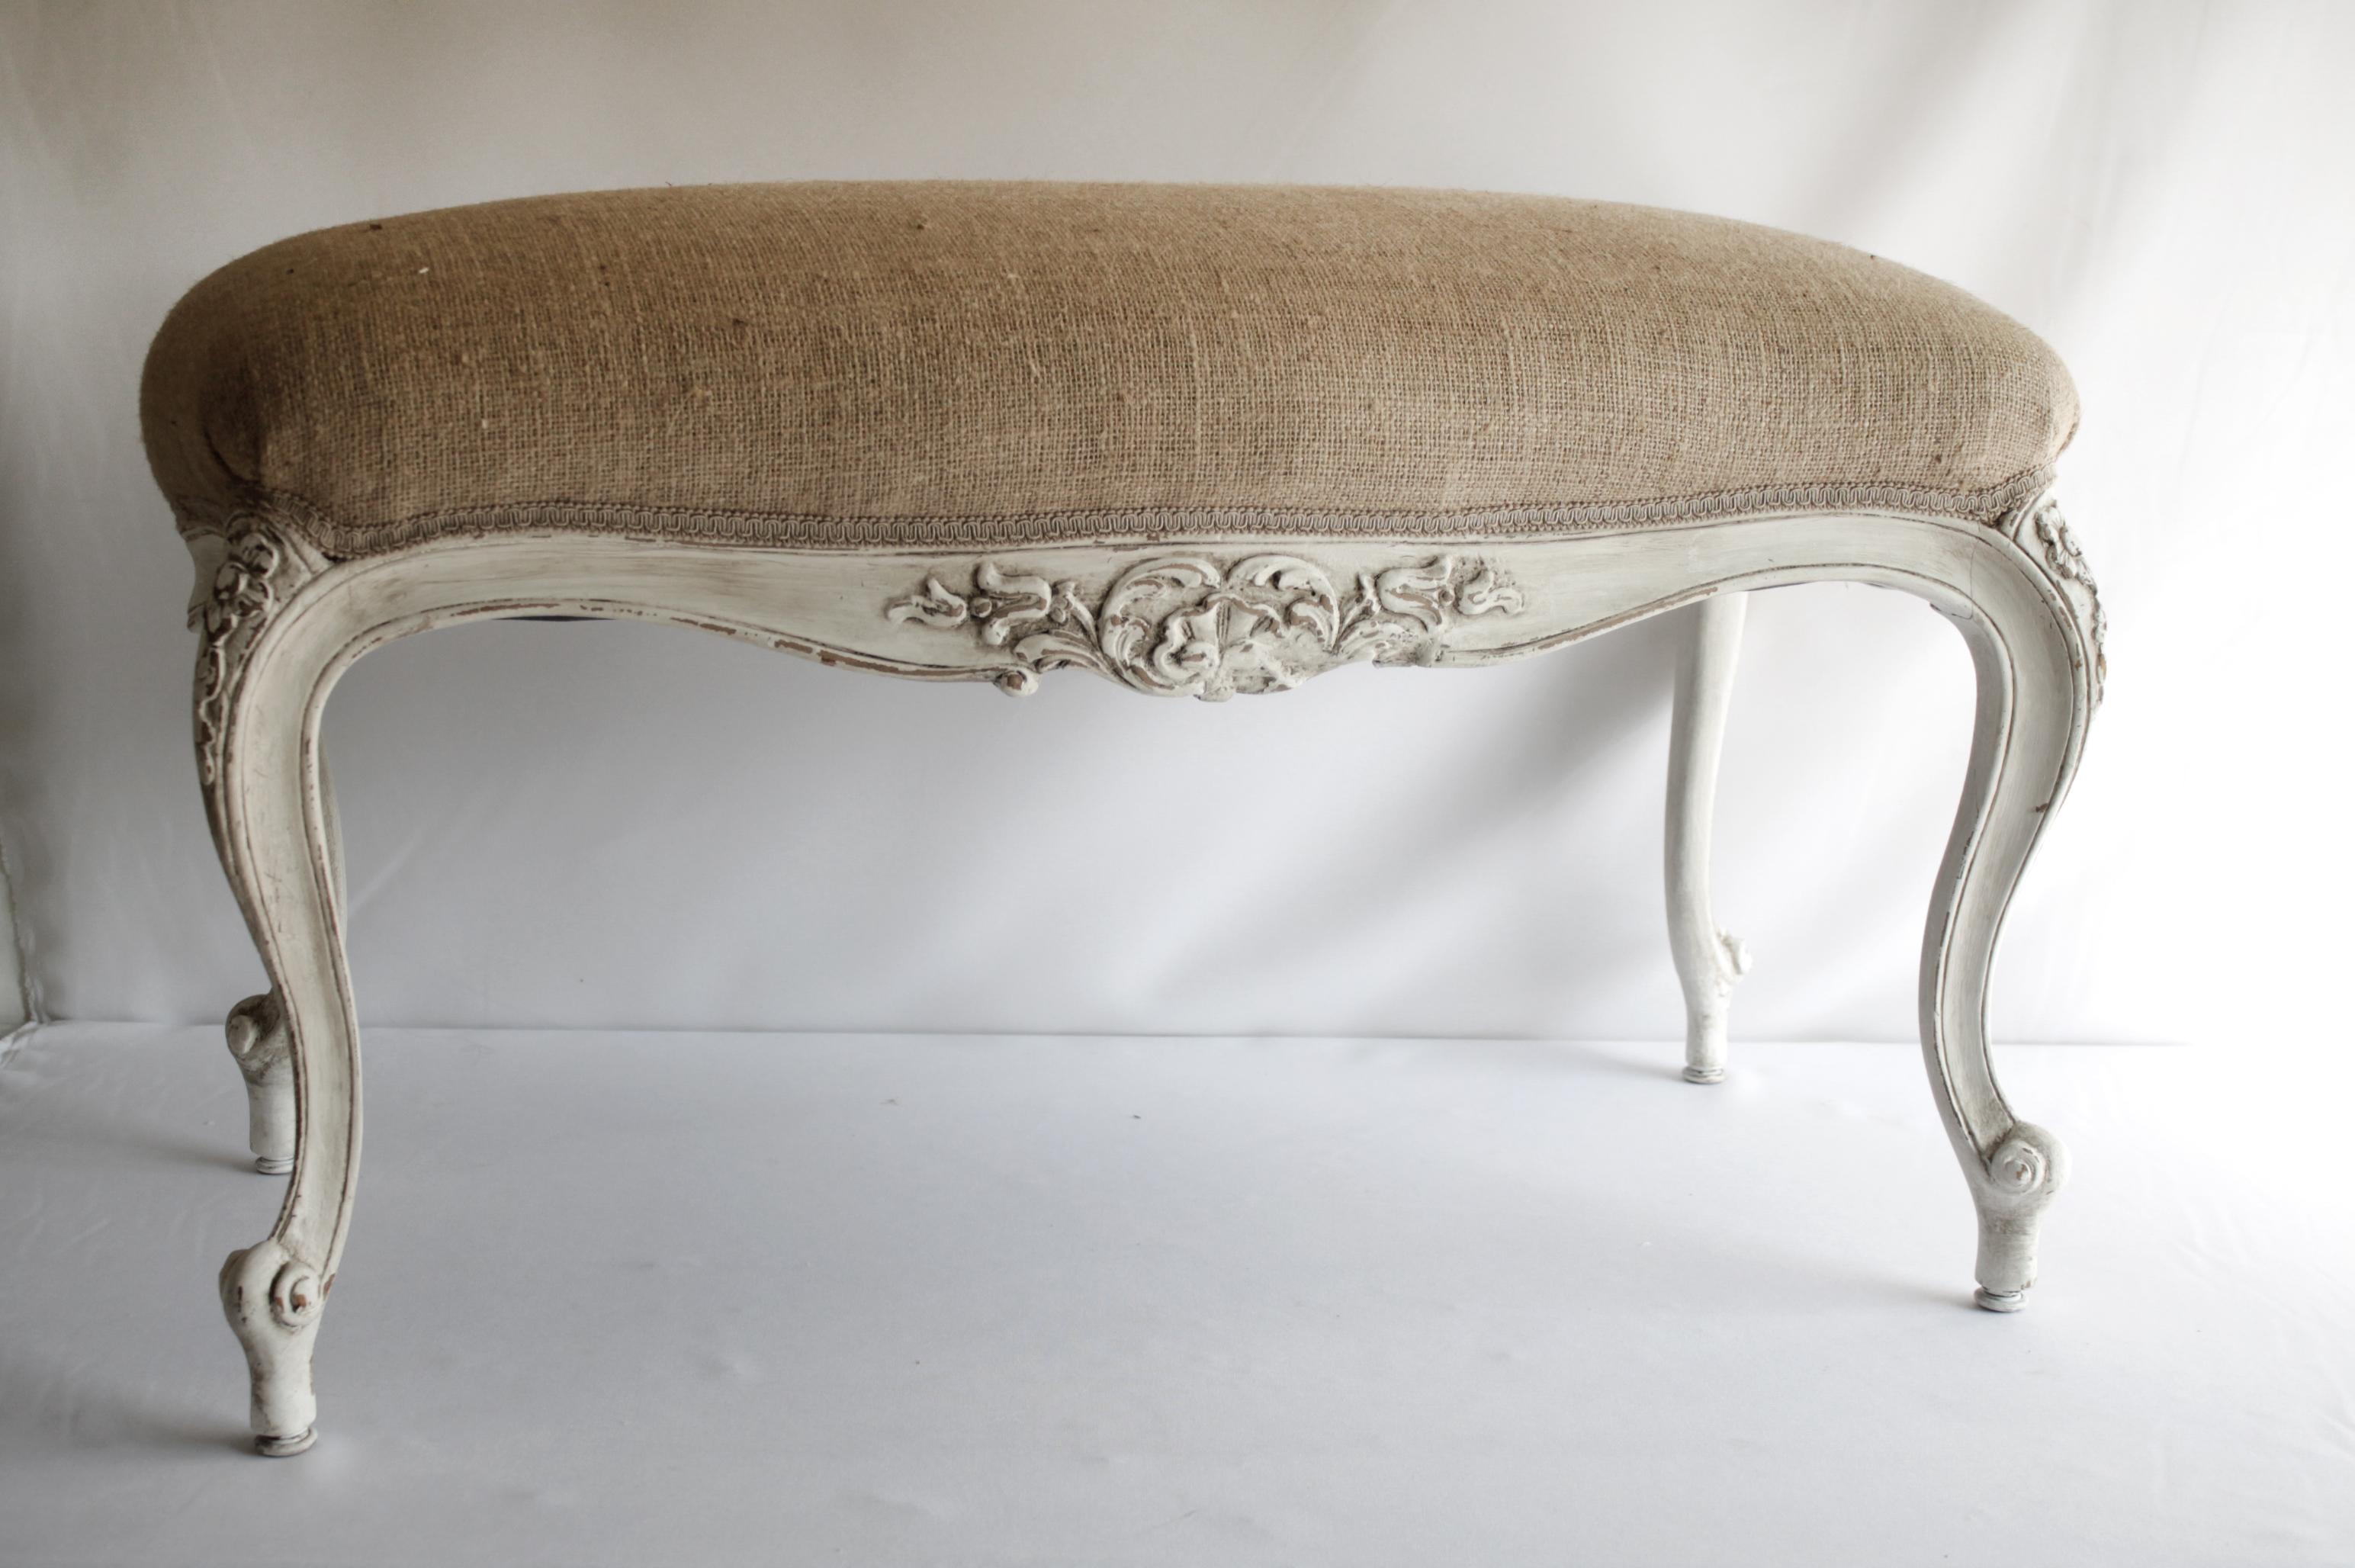 Vintage Louis XV style burlap upholstered bench or ottoman.
Painted our antique white patina, and upholstered with a burlap seat. Classic cabriole style legs with carved floral details at the top of each leg. The longer sides have a carved